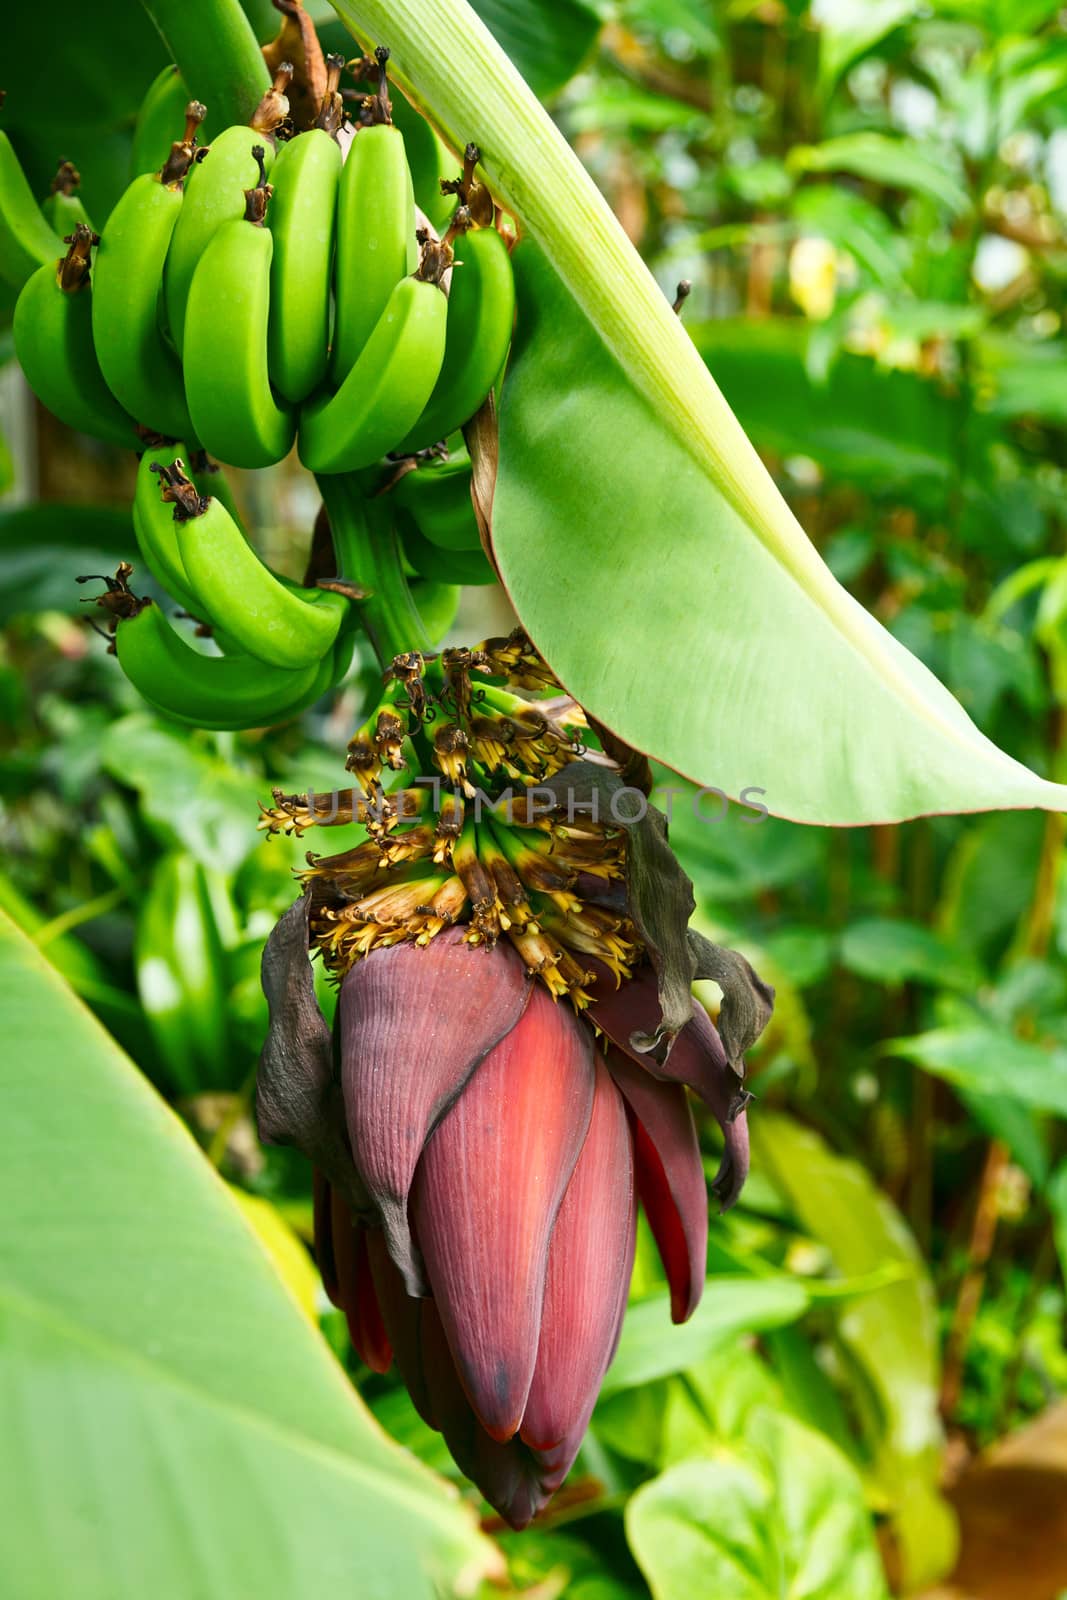 Banana tree with fruit and inflorescence